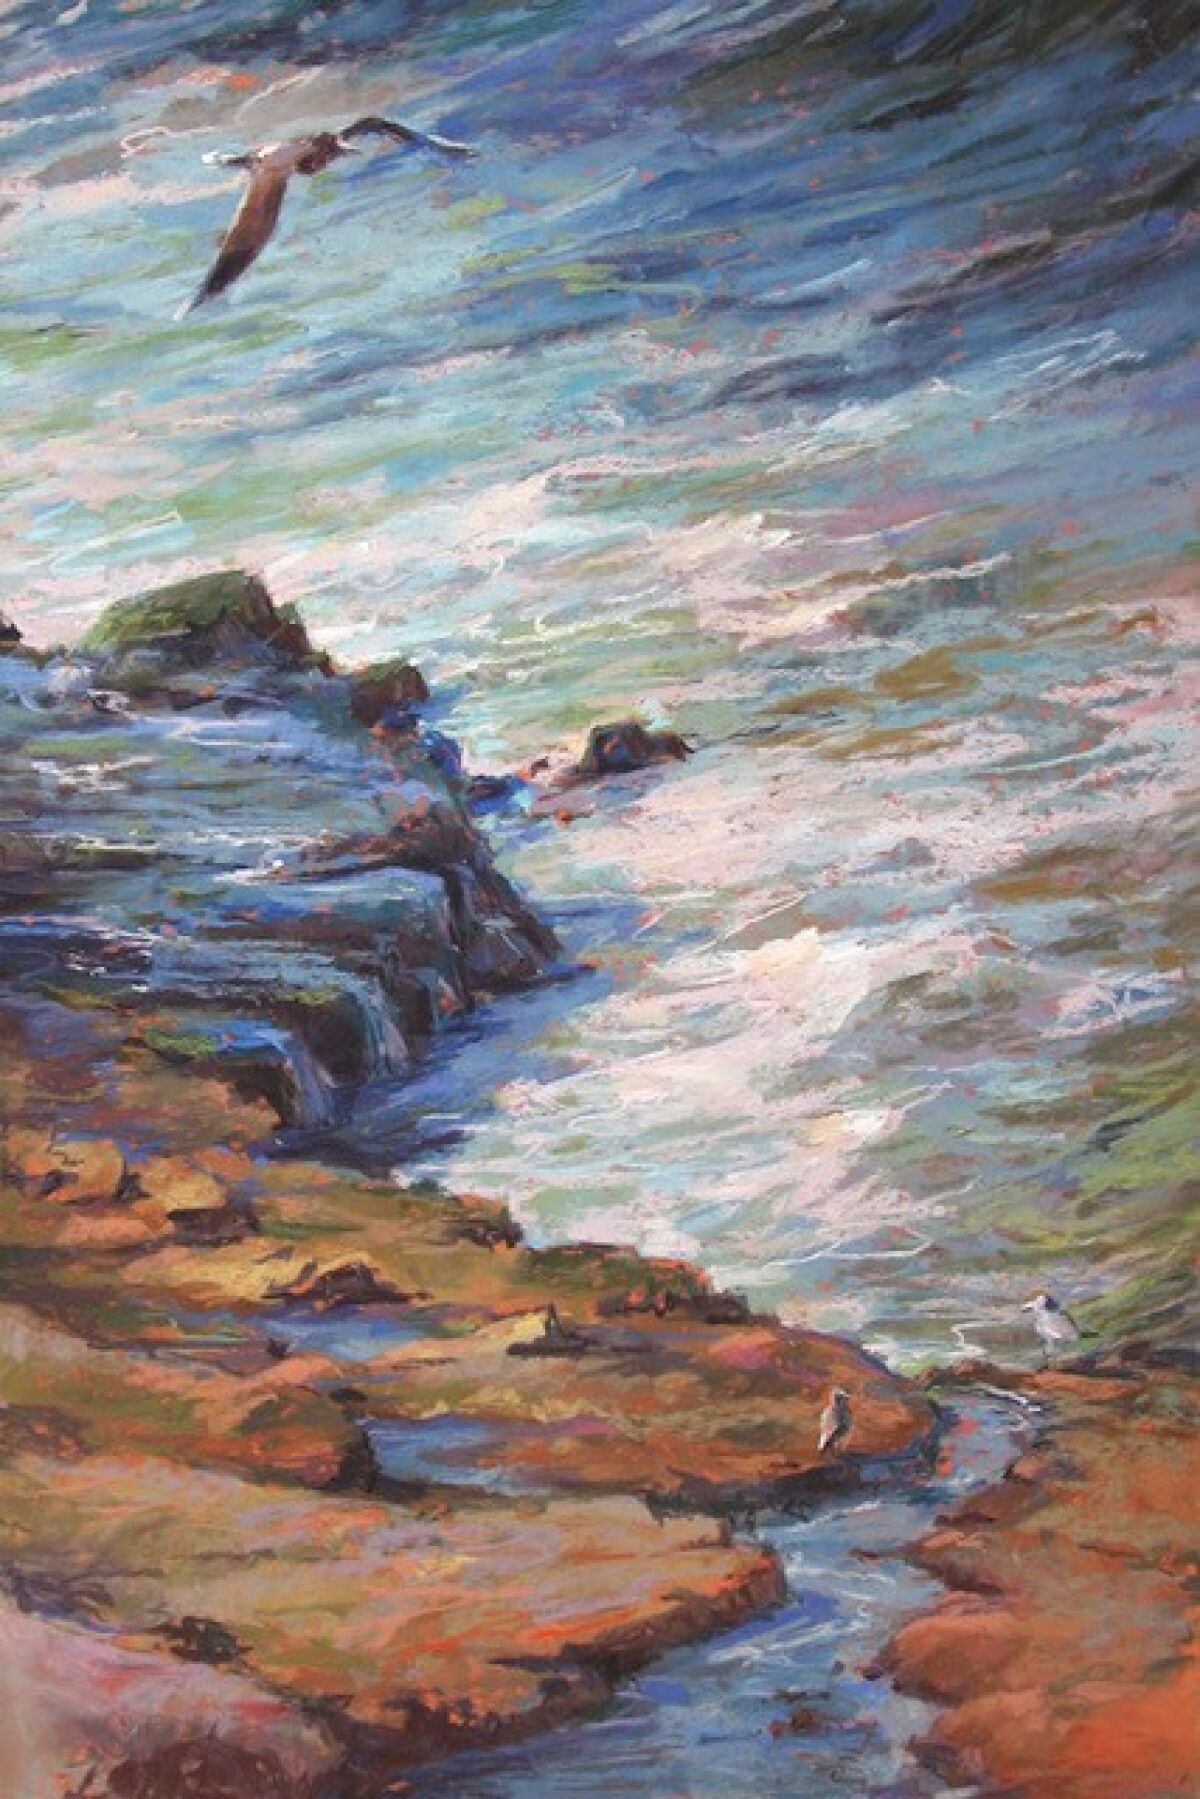 A seascape painting by Dot Renshaw.